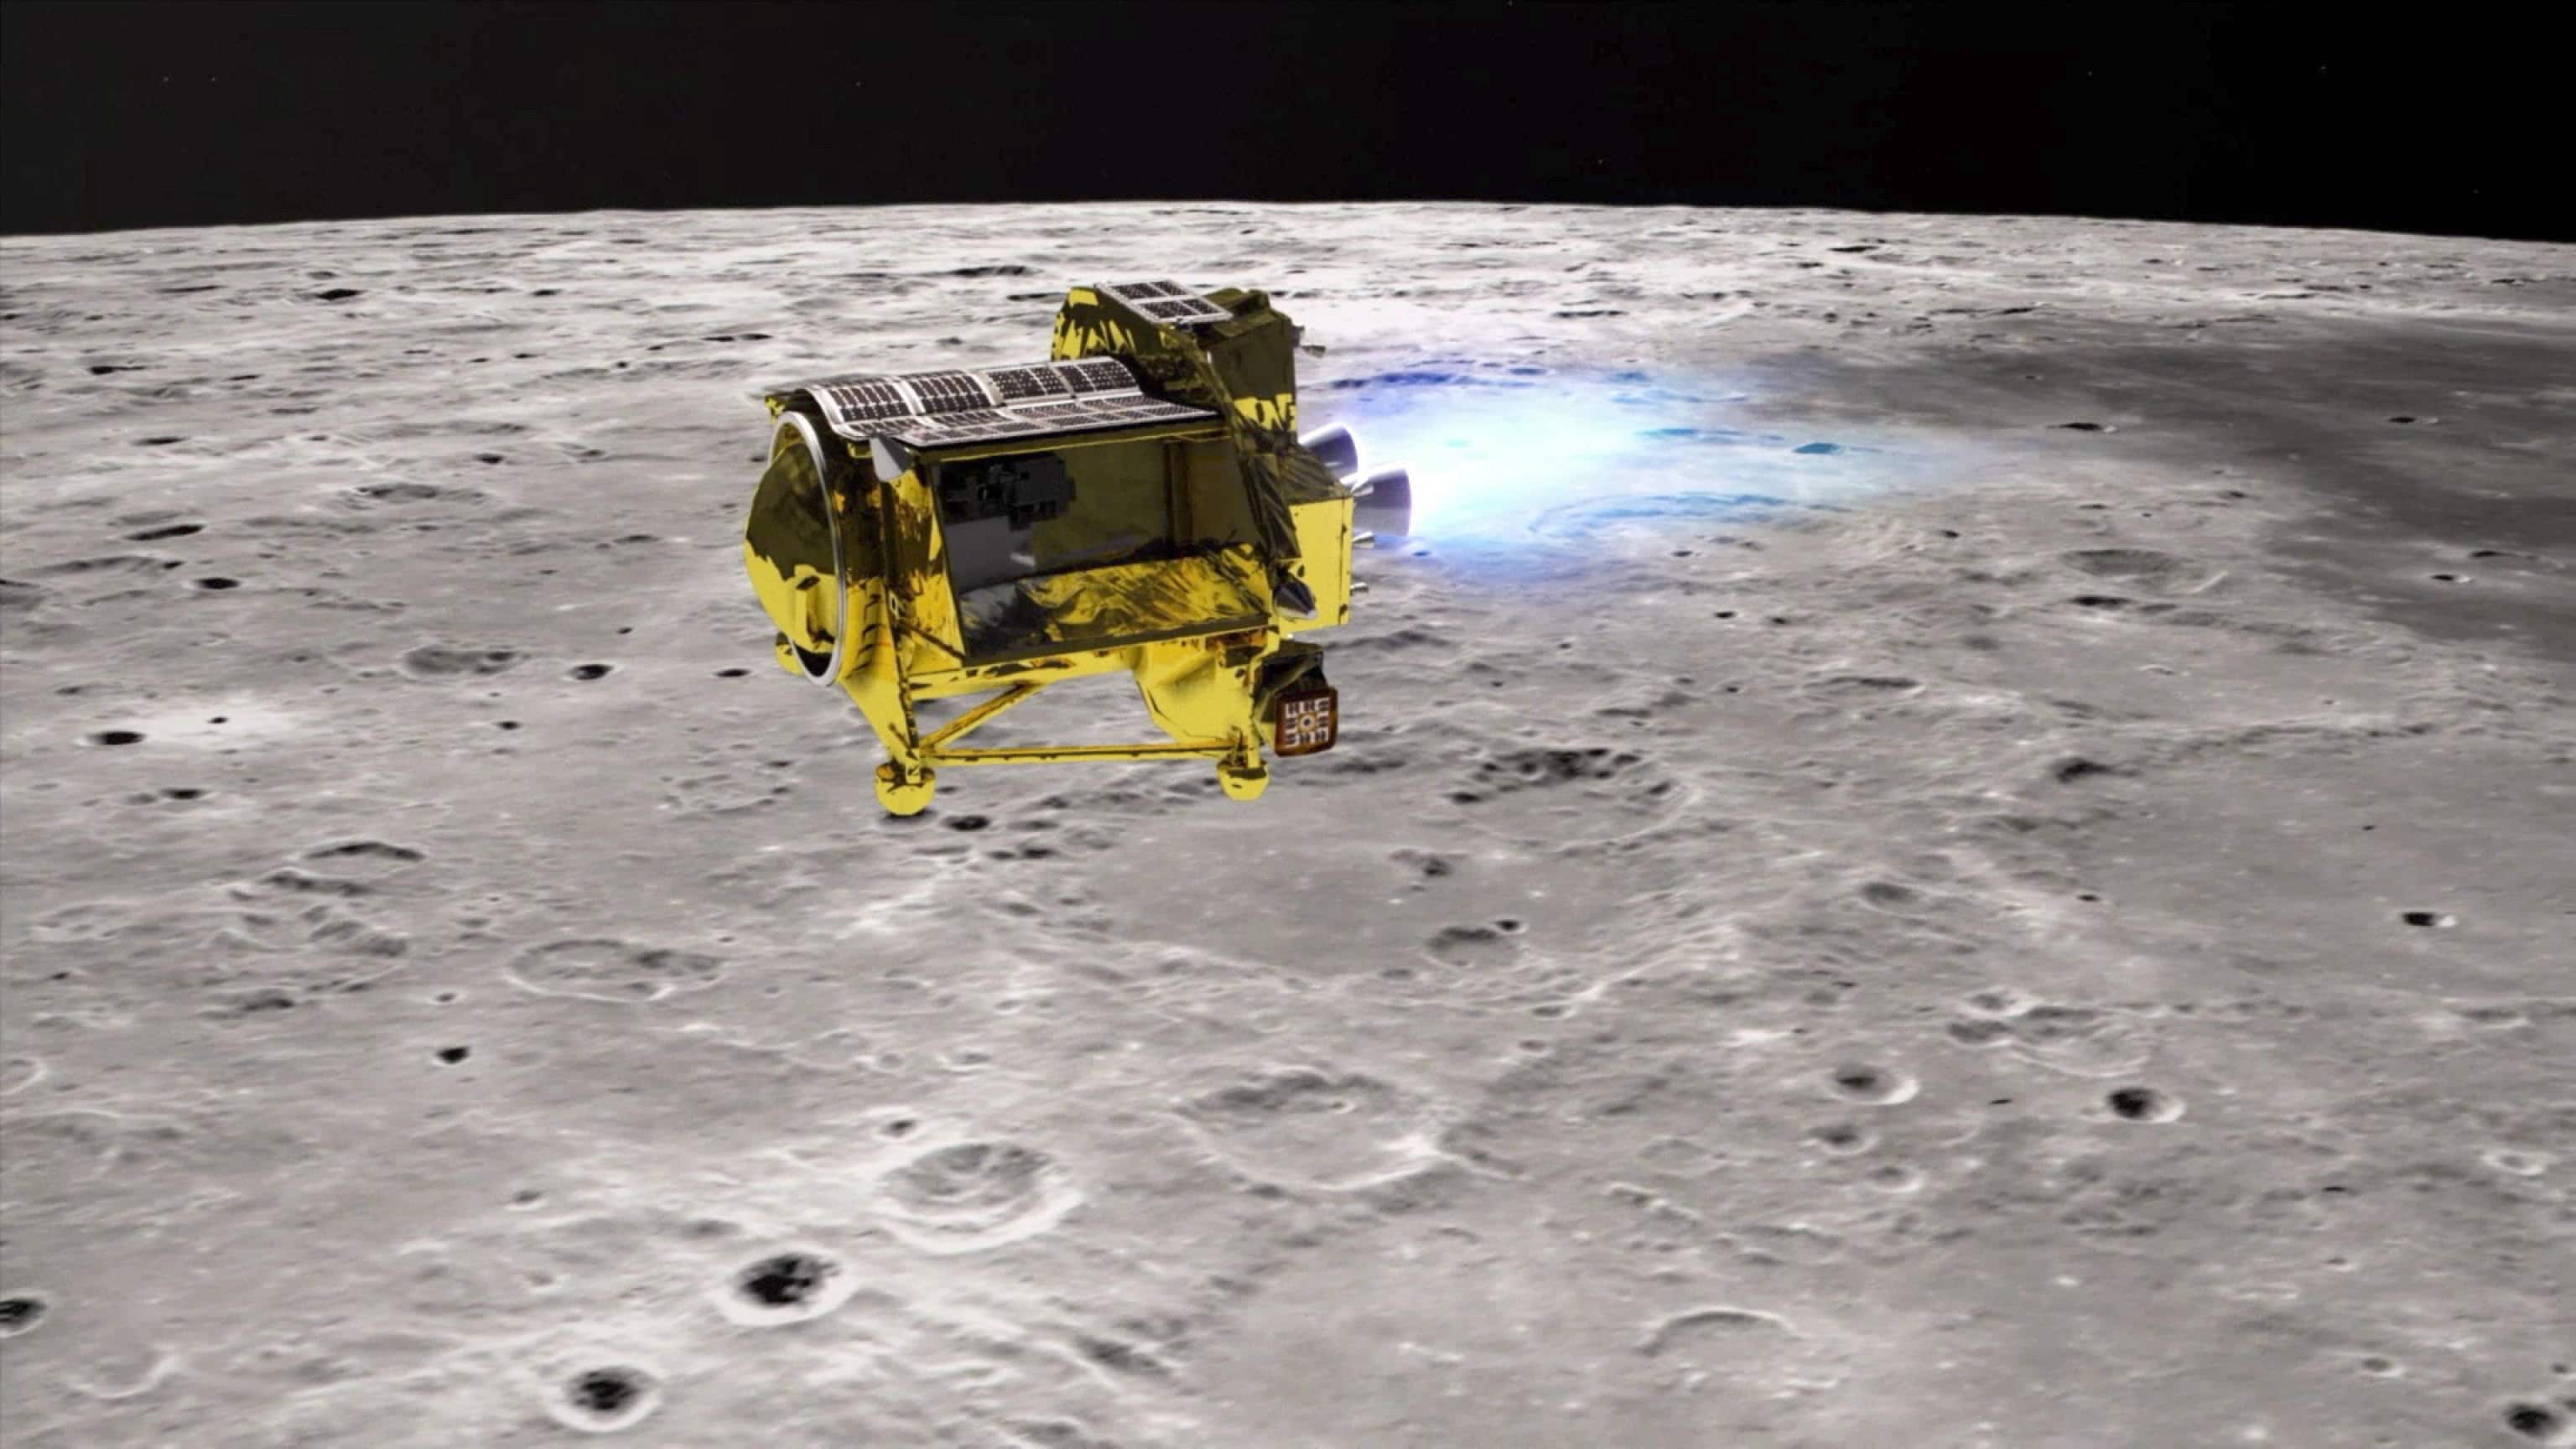 &nbsp;An undated handout image made available by the Japan Aerospace Exploration Agency (JAXA) on 20 January 2024 shows an artist illustration of the SLIM (Smart Lander for Investigating Moon) cruising over the moon. According to JAXA officials, in the early hours (Japan standard time) of 20 January 2024, SLIM successfully soft-landed on the moon but cannot generate power due to solar panel failure. ANSA/JAXA HANDOUT  HANDOUT EDITORIAL USE ONLY/NO SALES HANDOUT EDITORIAL USE ONLY/NO SALES